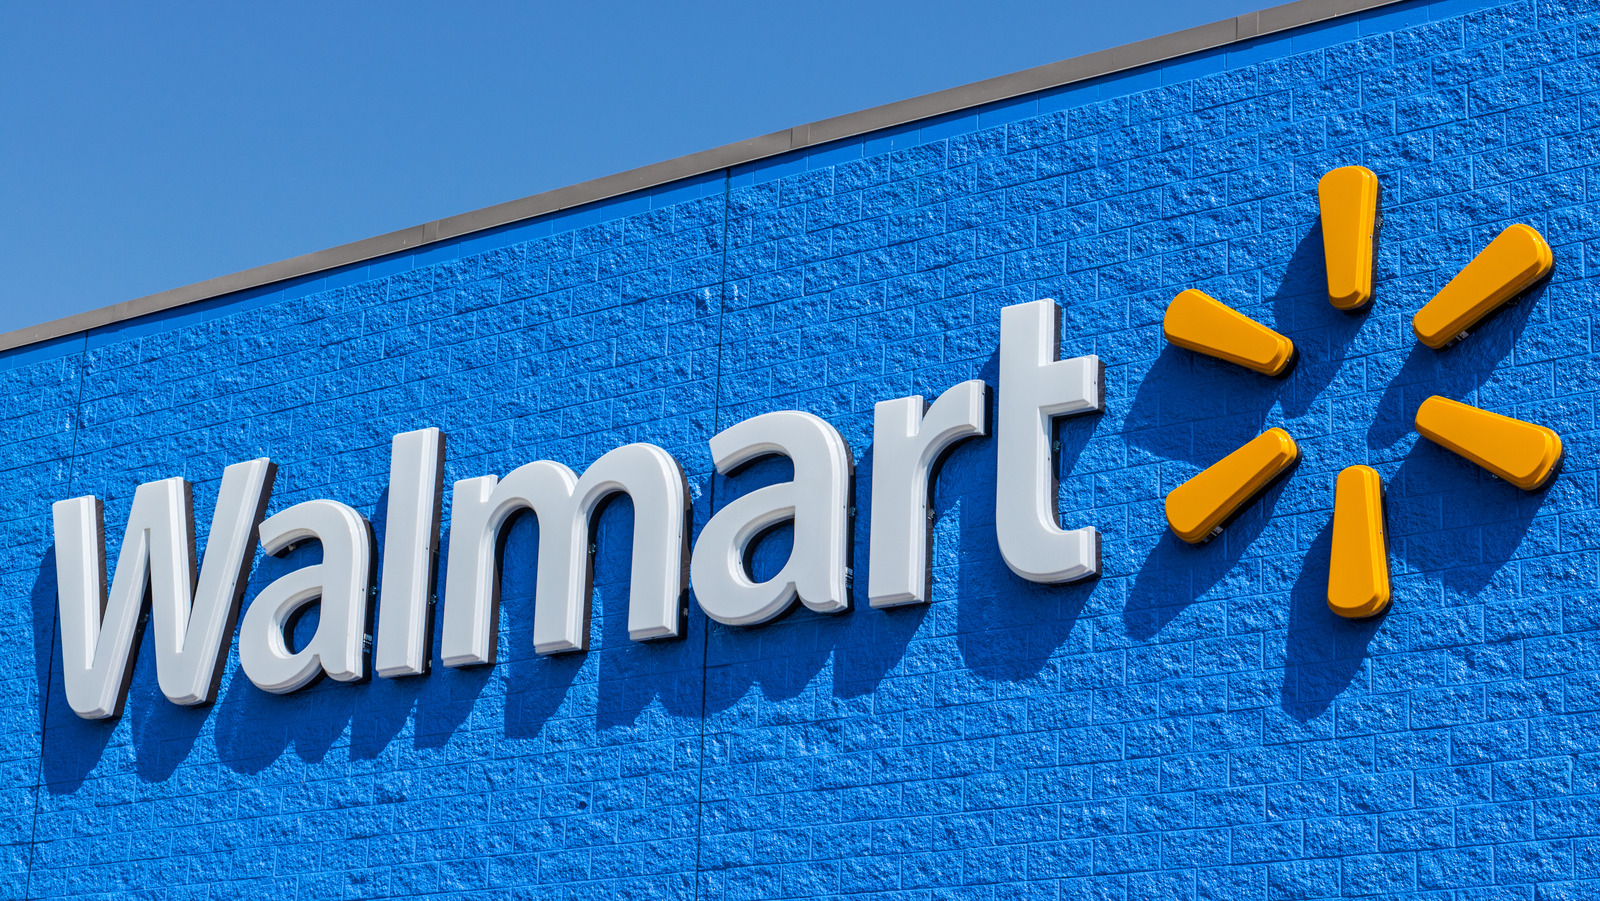 Walmart Is Making These Changes To Attract And Retain Employees